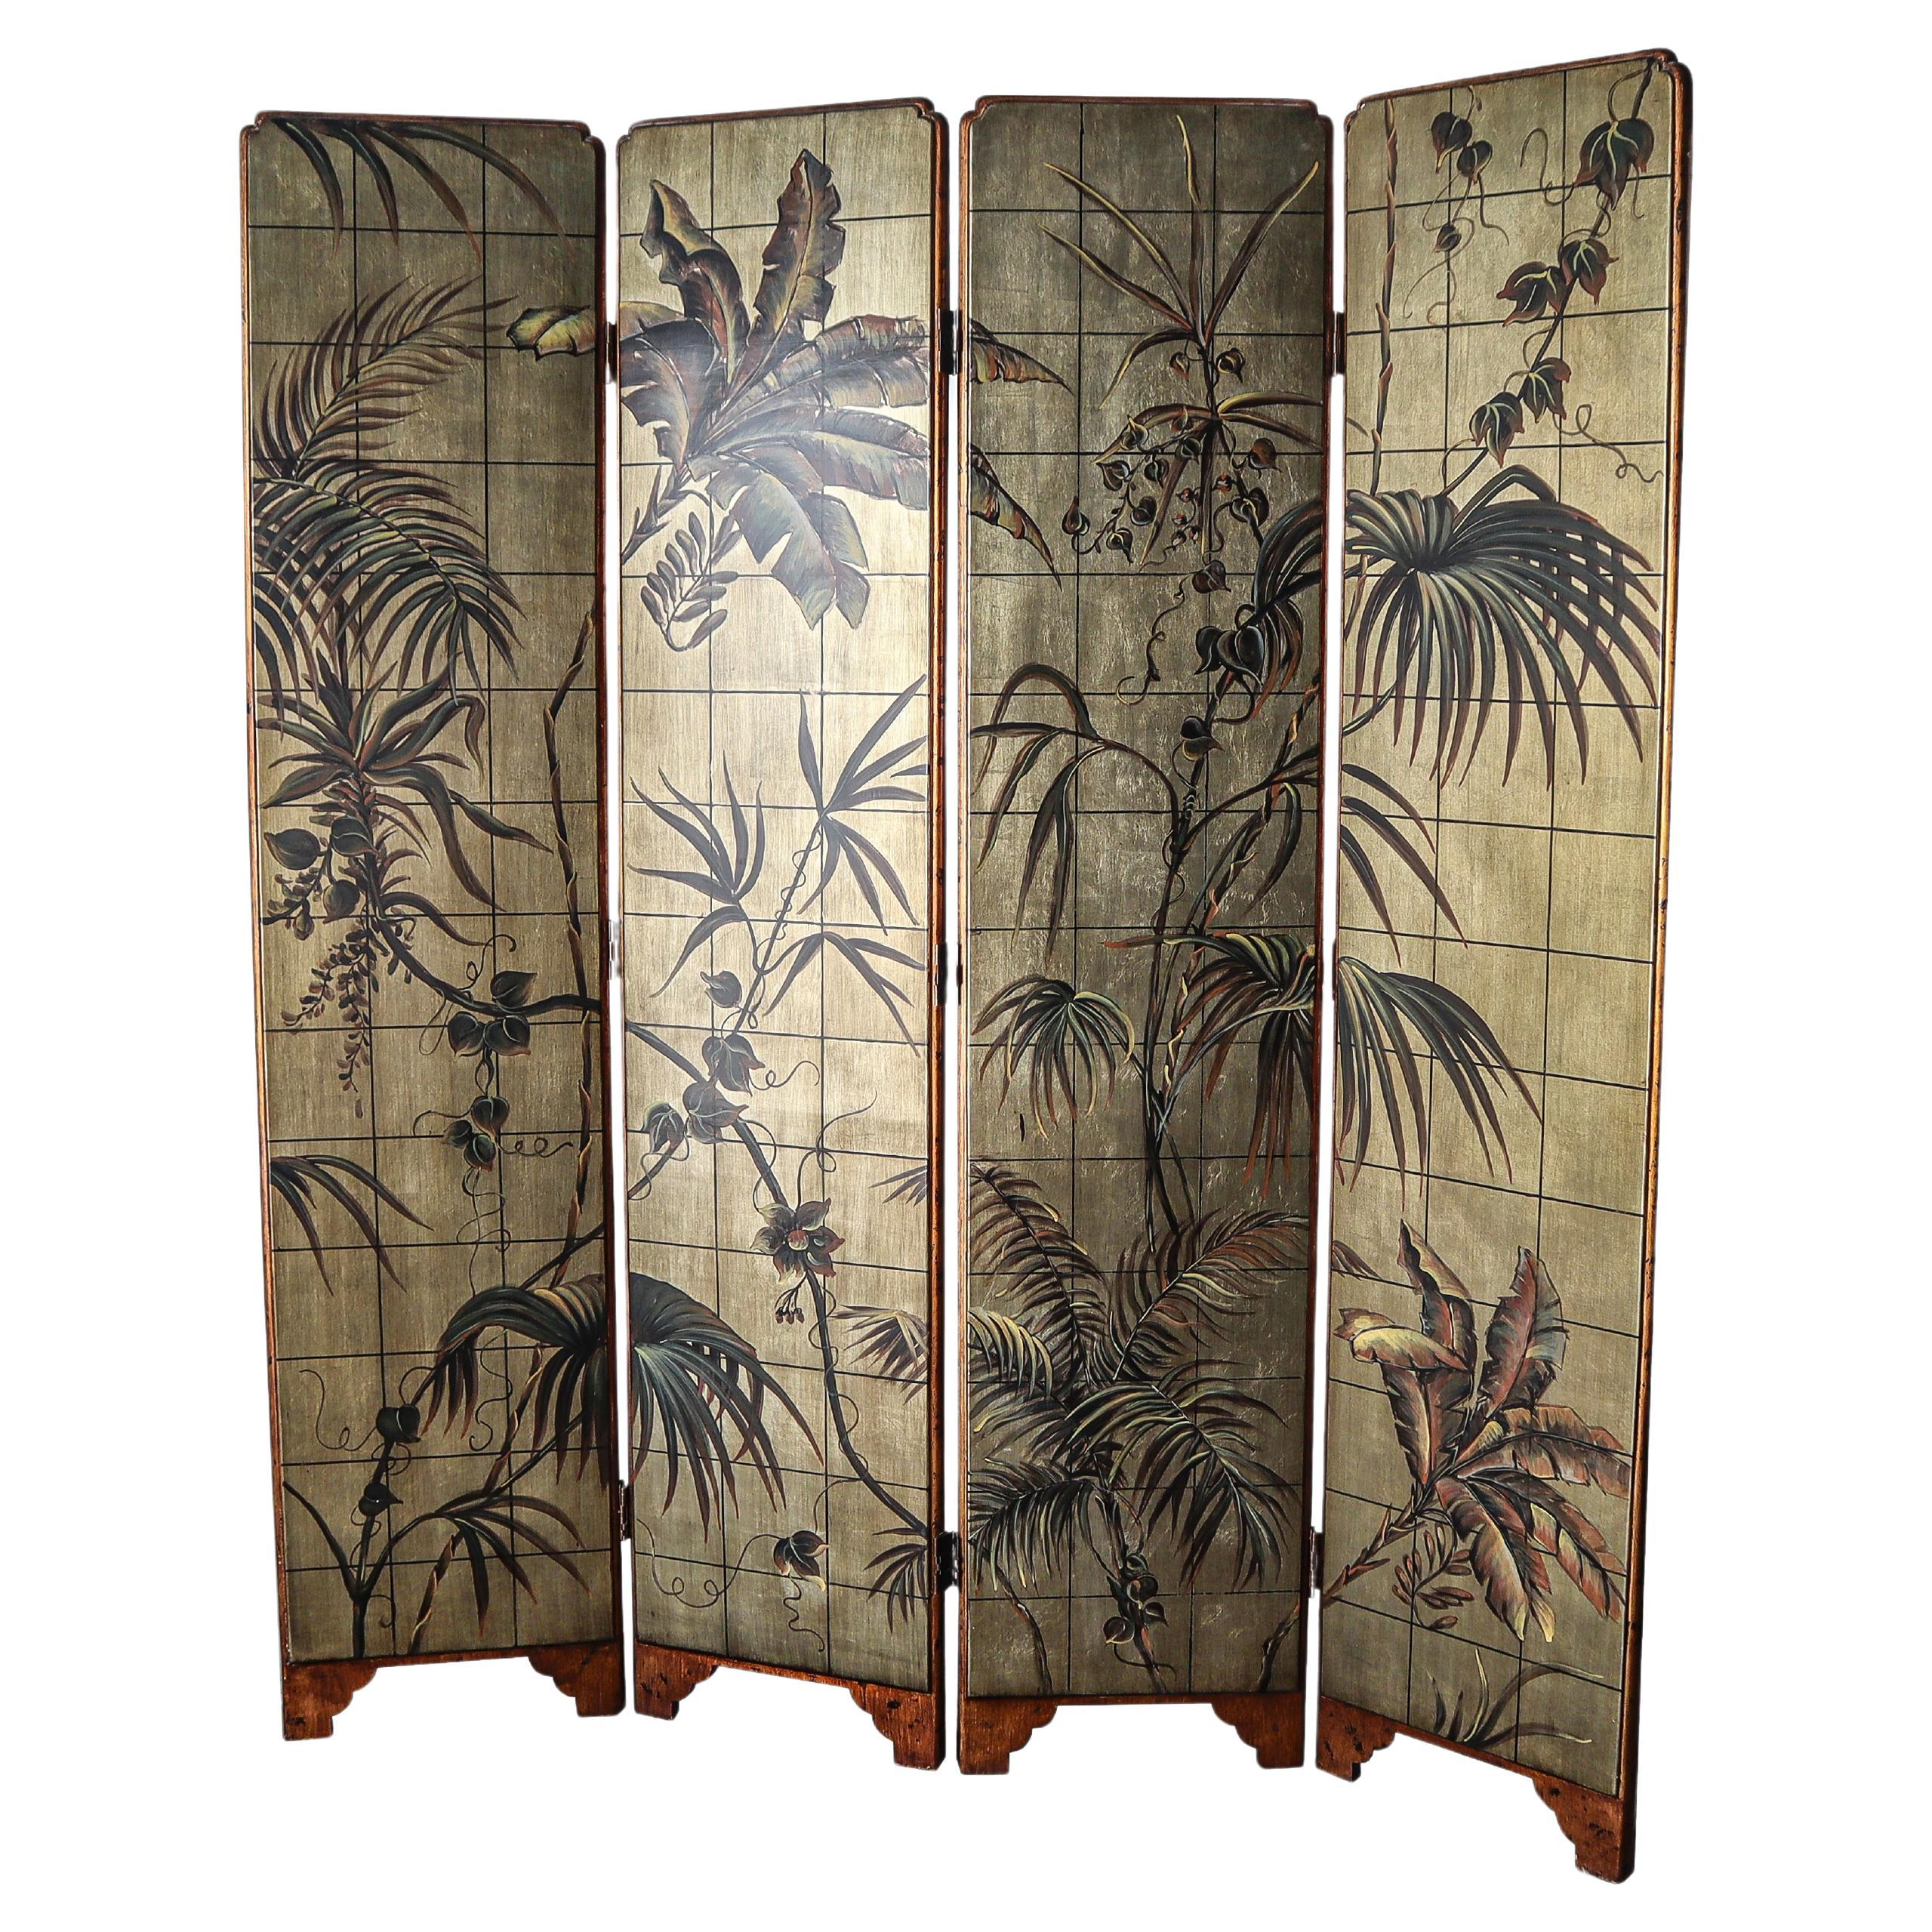 7ft Hand Painted Botanical Four-Panel Screen